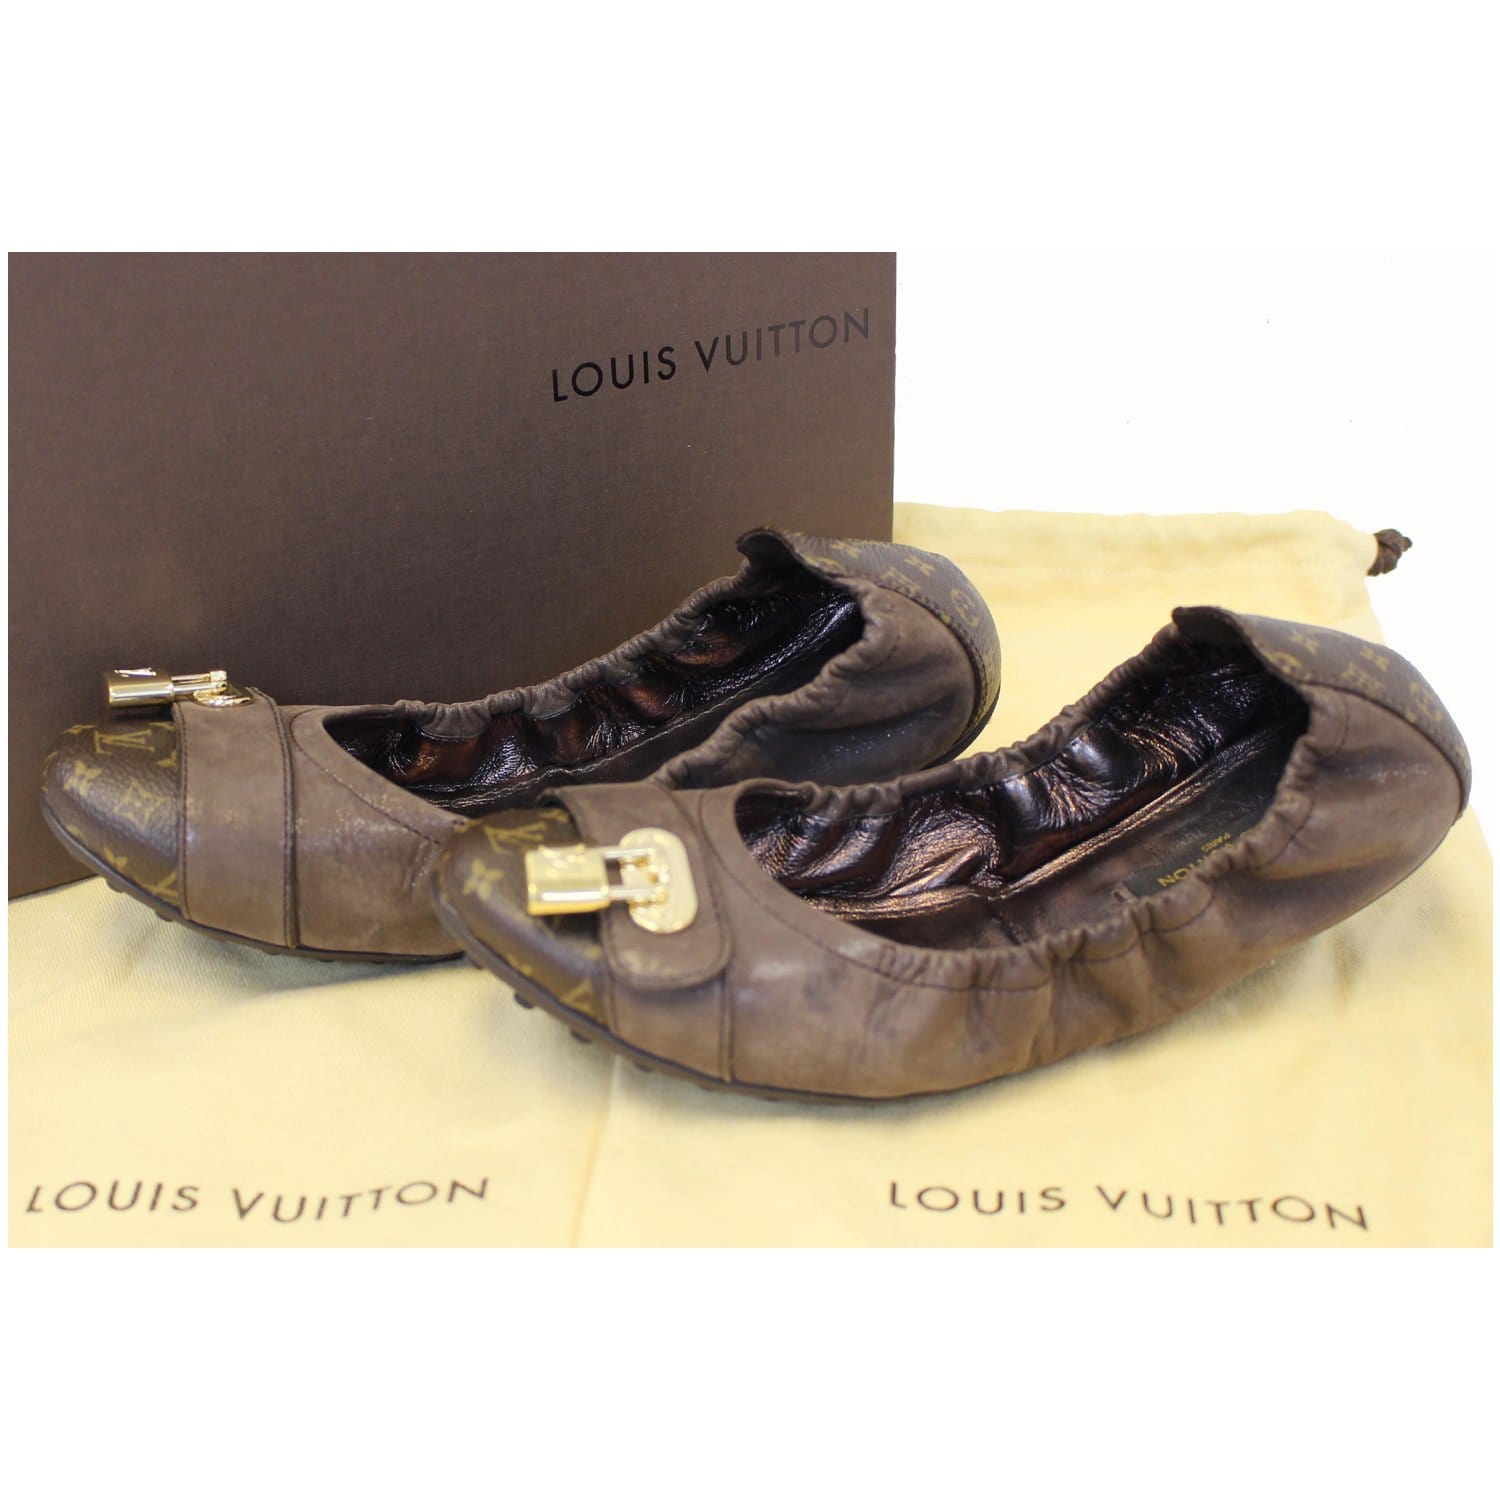 LOUIS VUITTON LOUIS VUITTON Loafers Flat shoes Monogram Brown Used